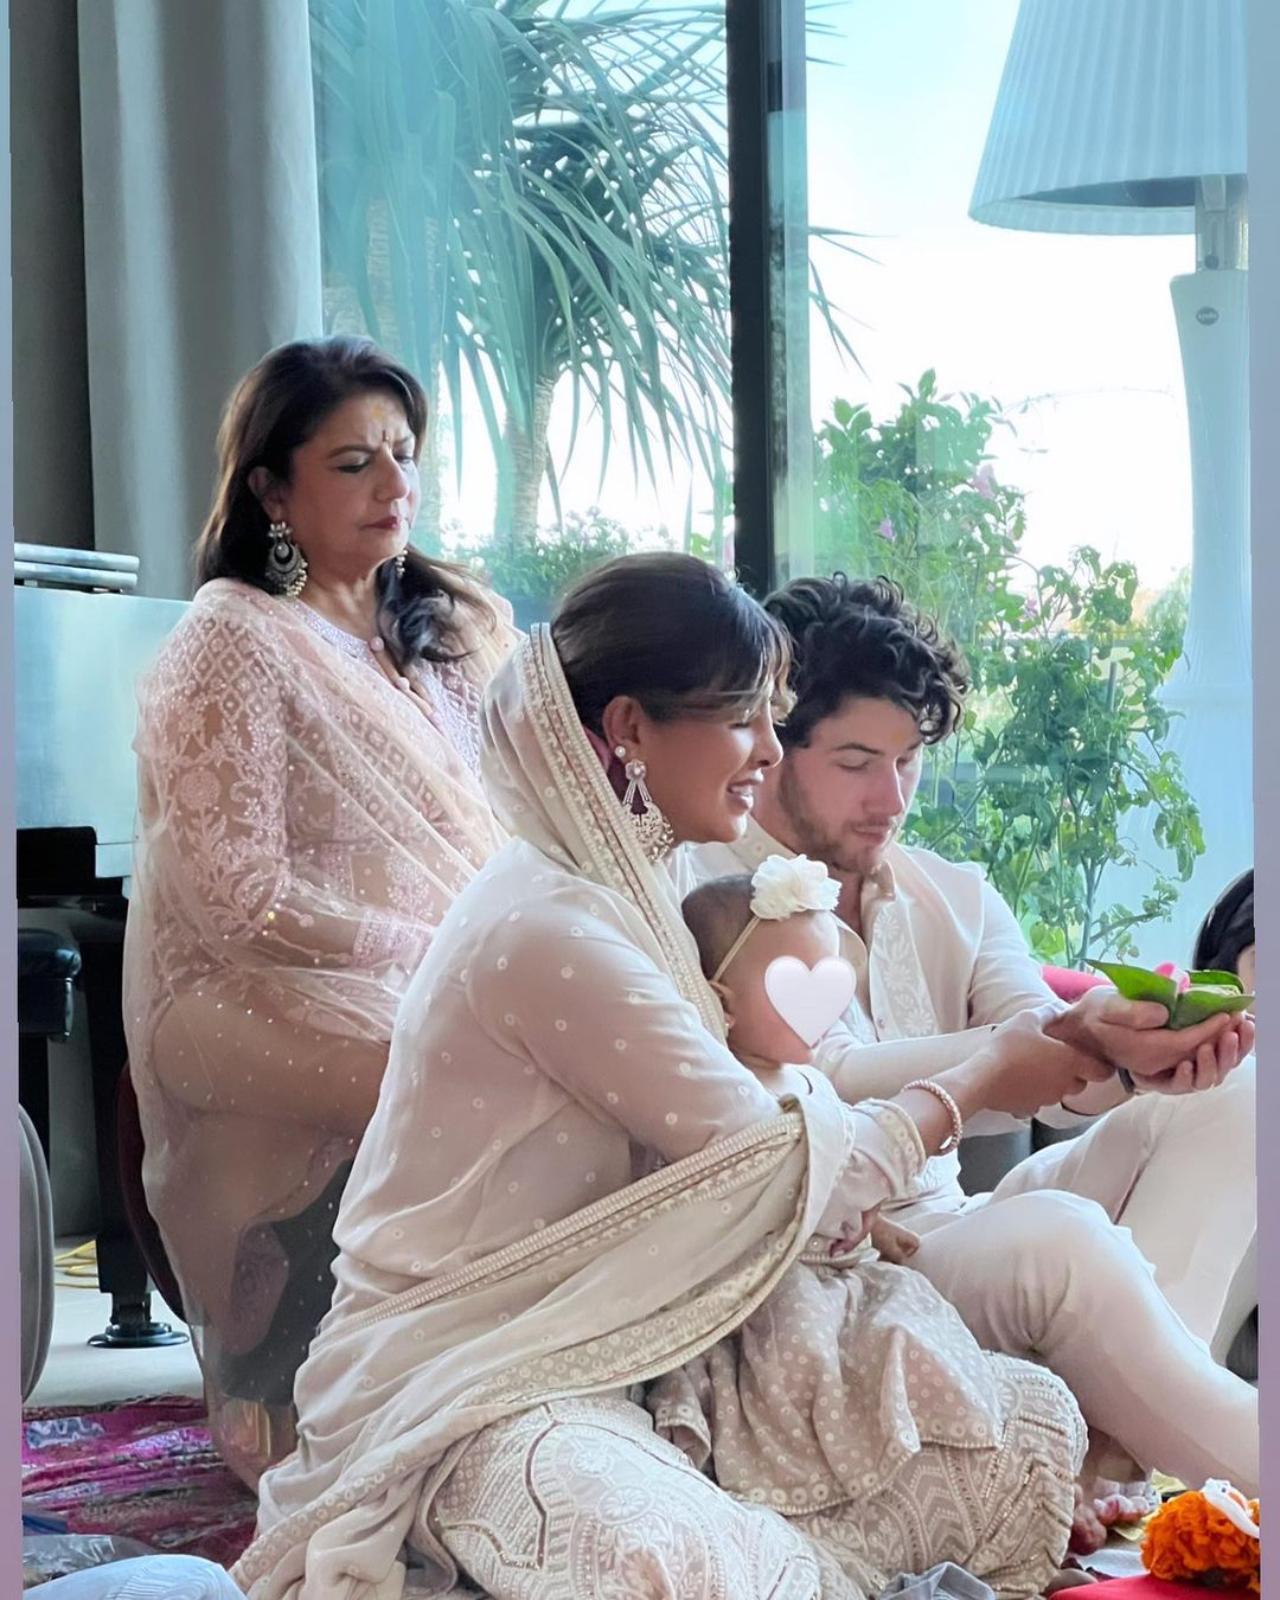 Priyanka Chopra had an intimate Diwali celebration at her LA home surrounded by her loved ones